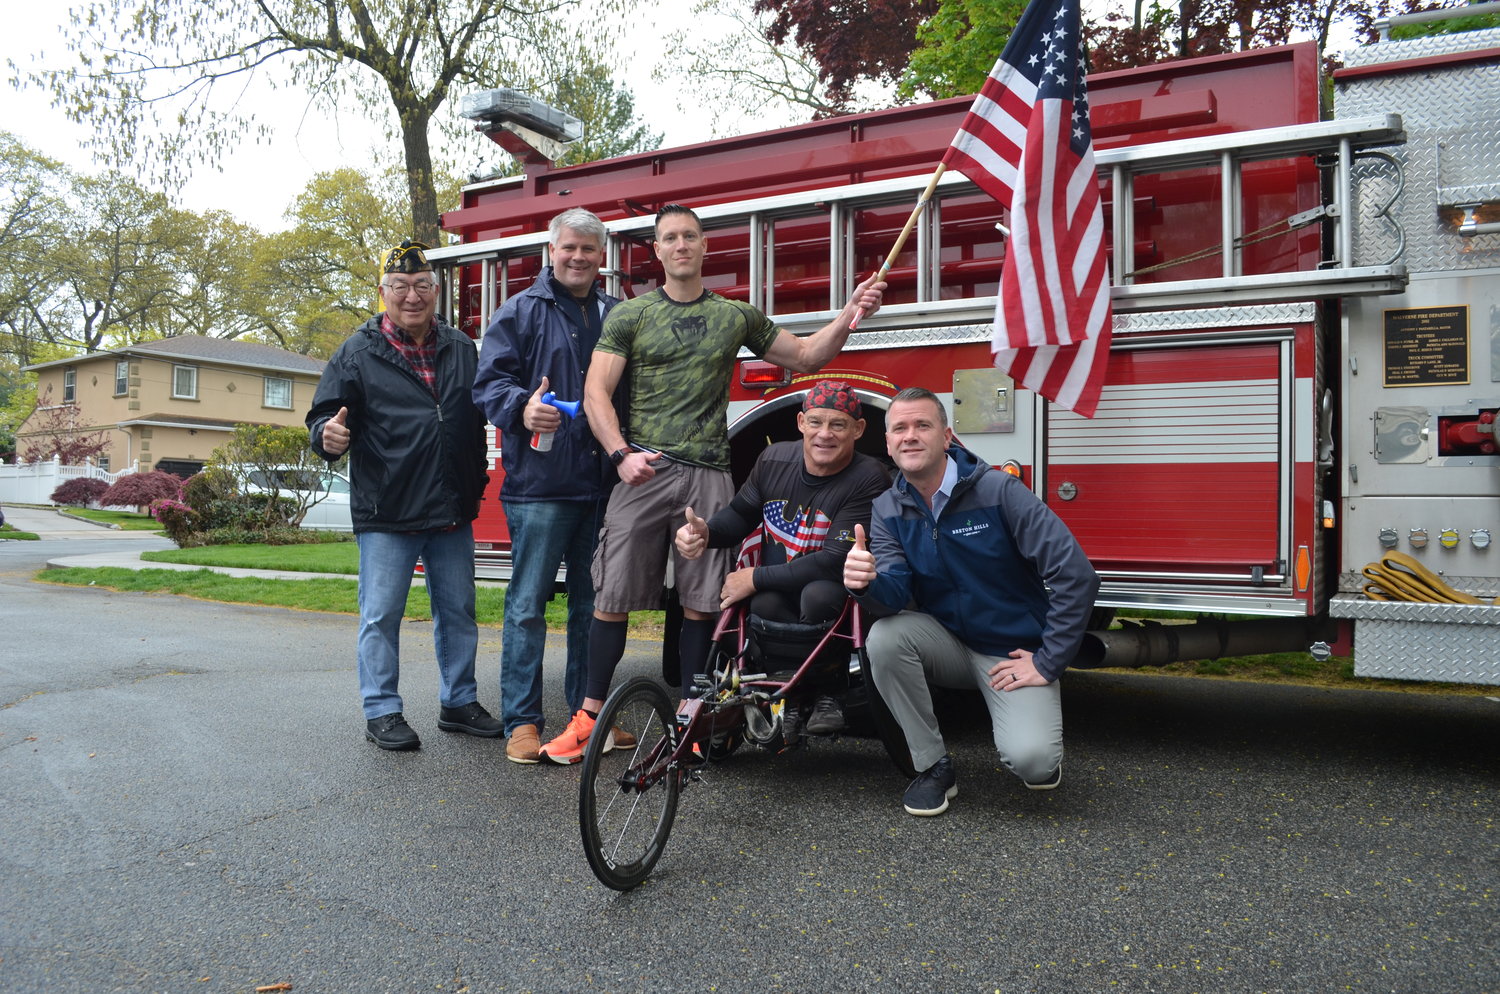 The Village of Malverne and American Legion Post 44 teamed up with local athletes to raise money for veterans and first responders. From left above were post Commander Tony Marino, Mayor Keith Corbett, “Patriot Man” Greg Waxman, wheelchair athlete Peter Hawkins and village Trustee Timothy Sullivan.